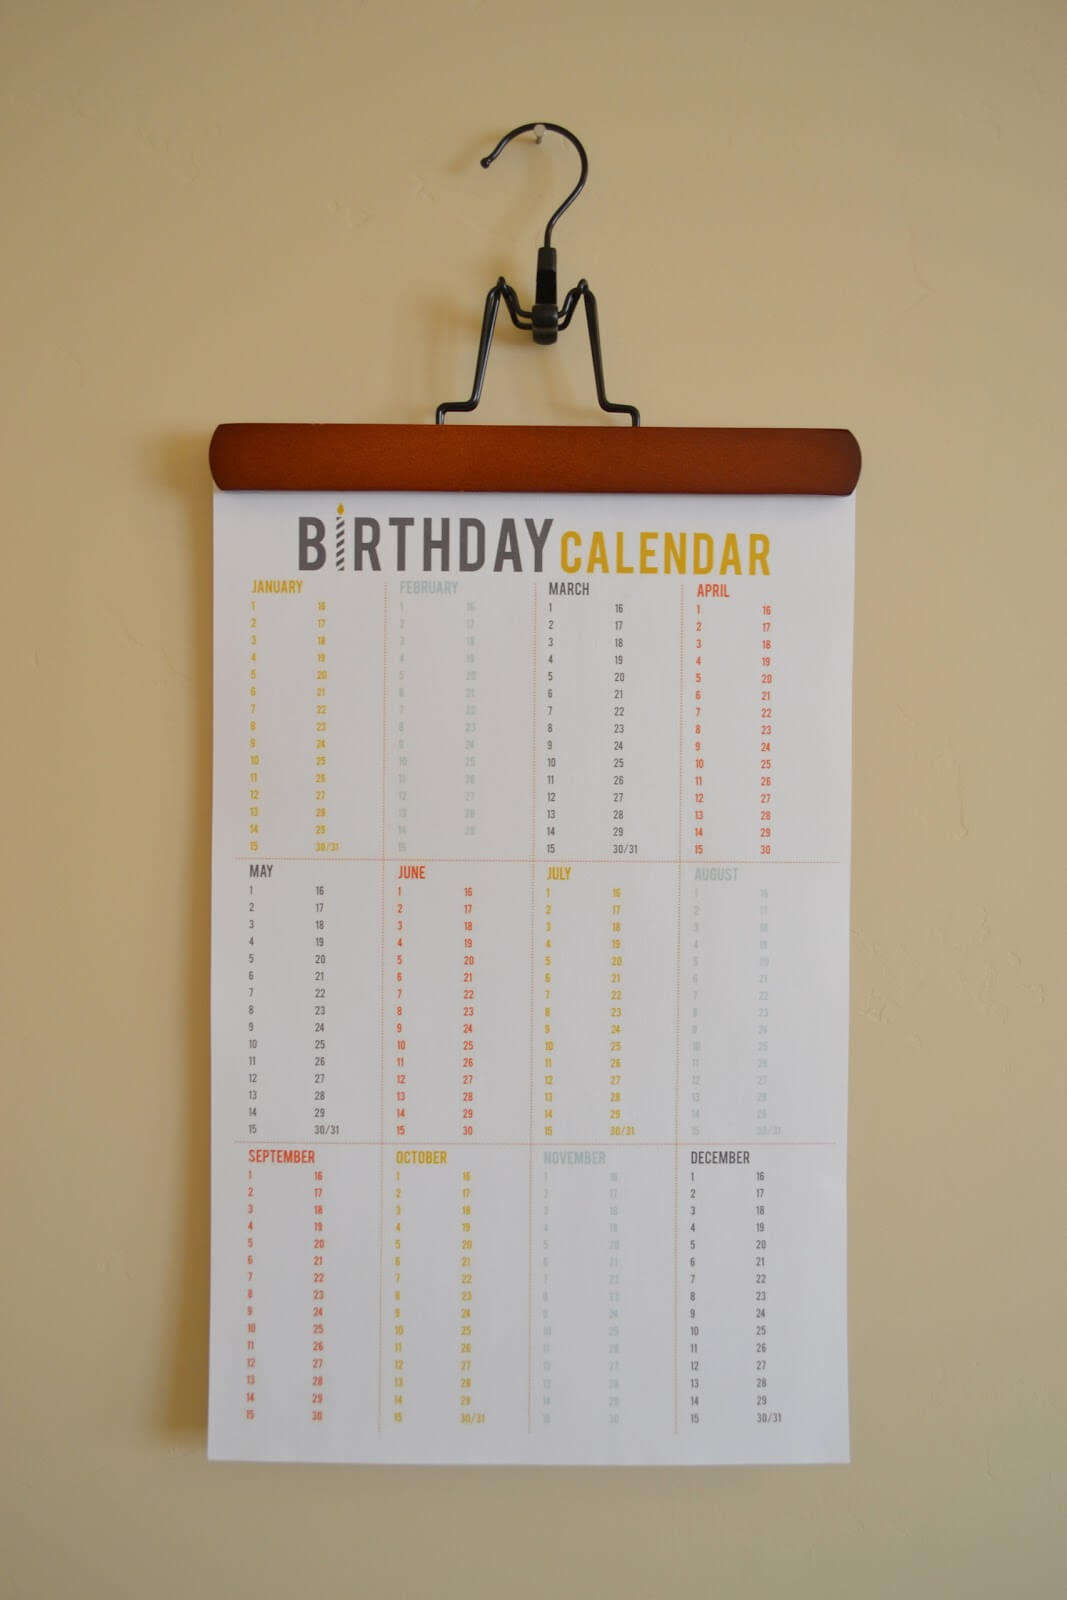 Memory-aiding Birthday Calendar for Multiple Occasions